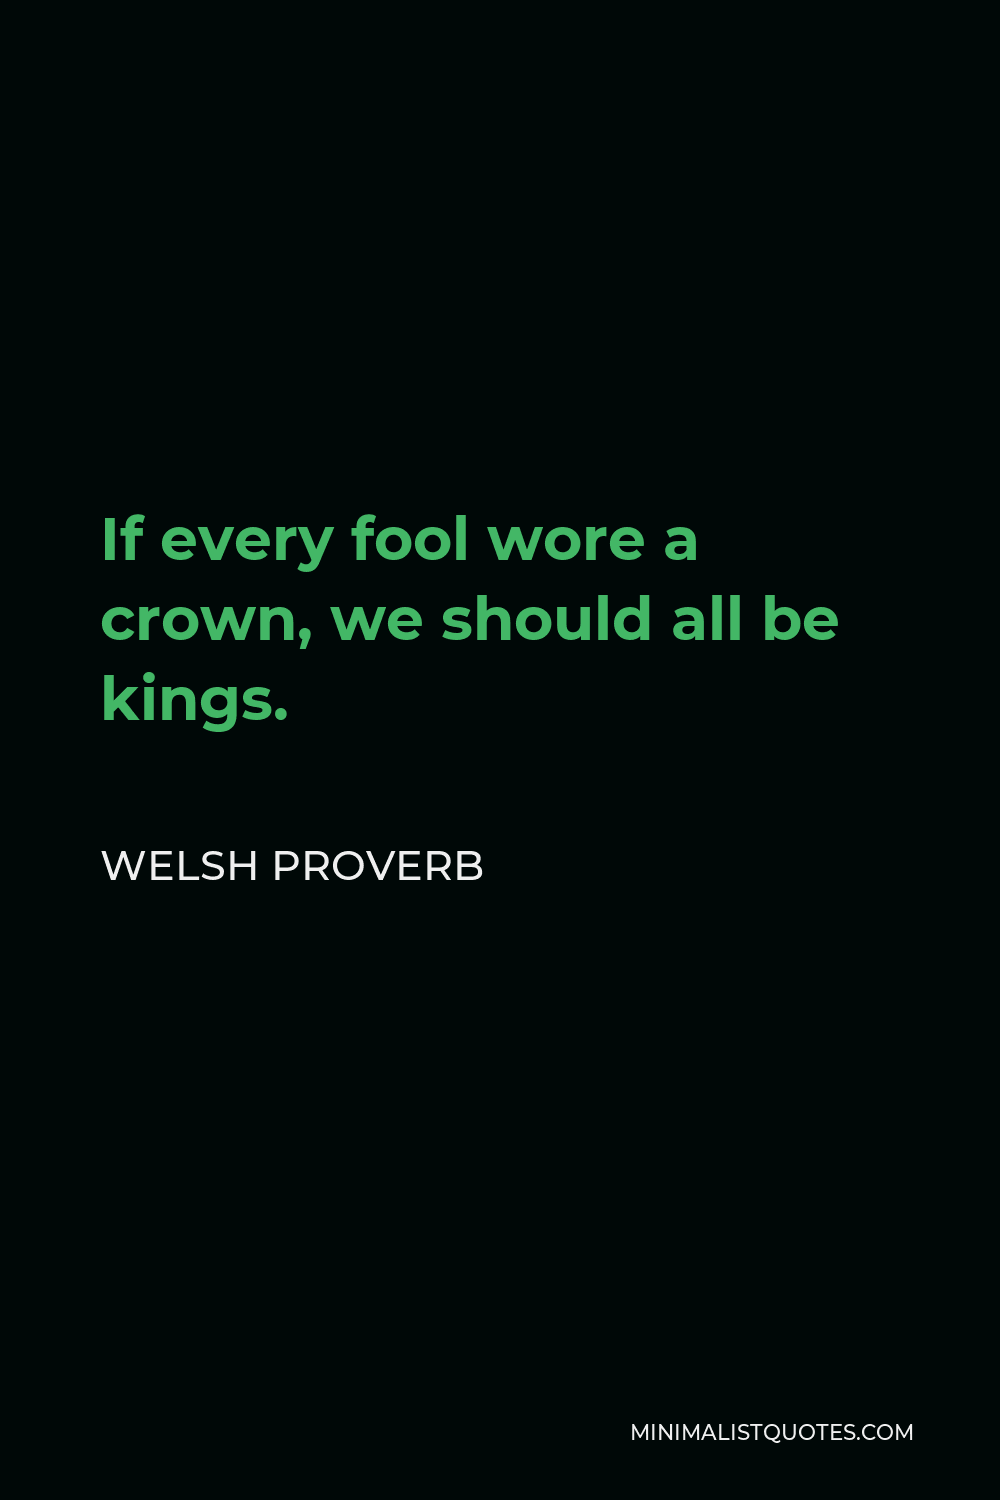 Welsh Proverb Quote - If every fool wore a crown, we should all be kings.